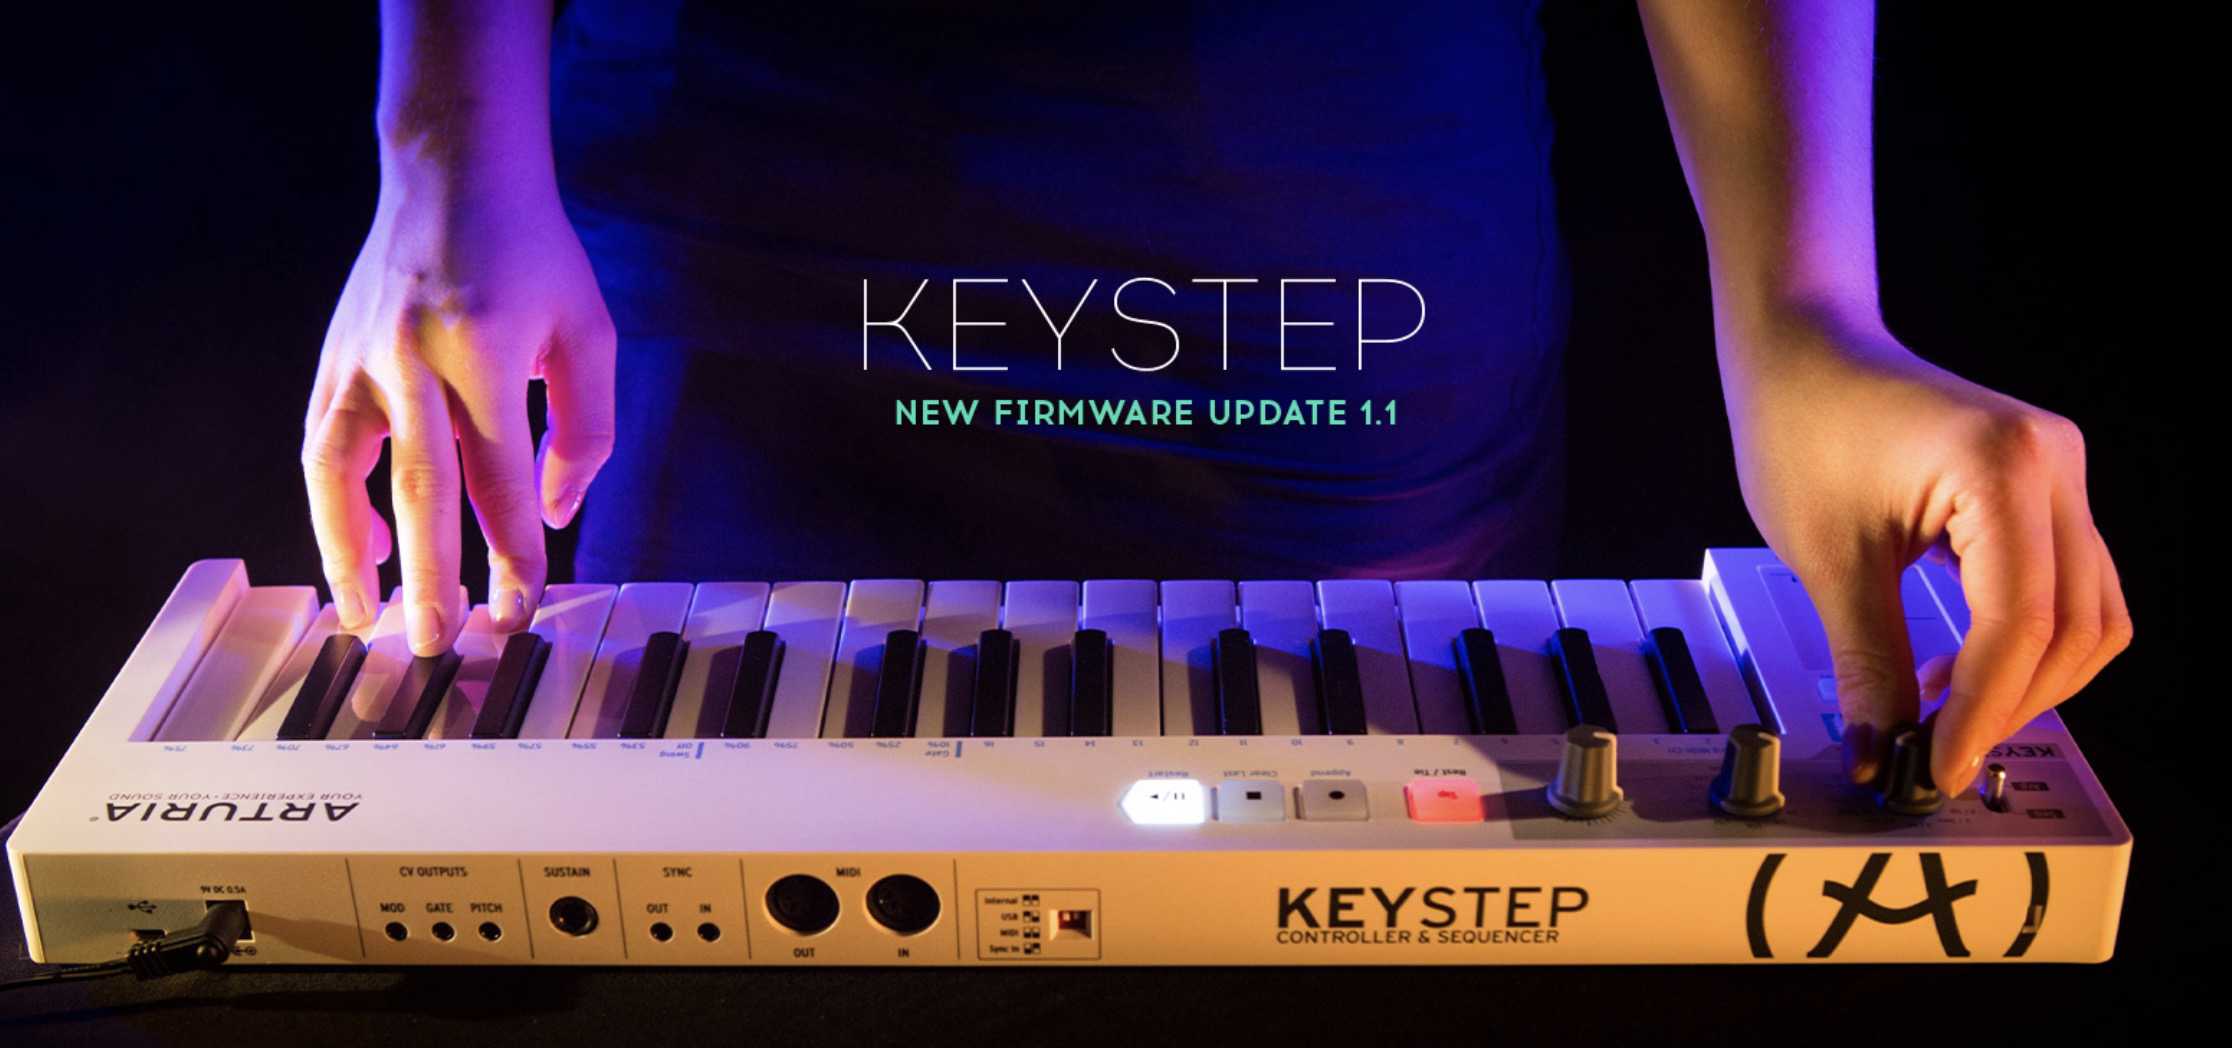 Keystep Just Got Better With the Release of Firmware 1.1